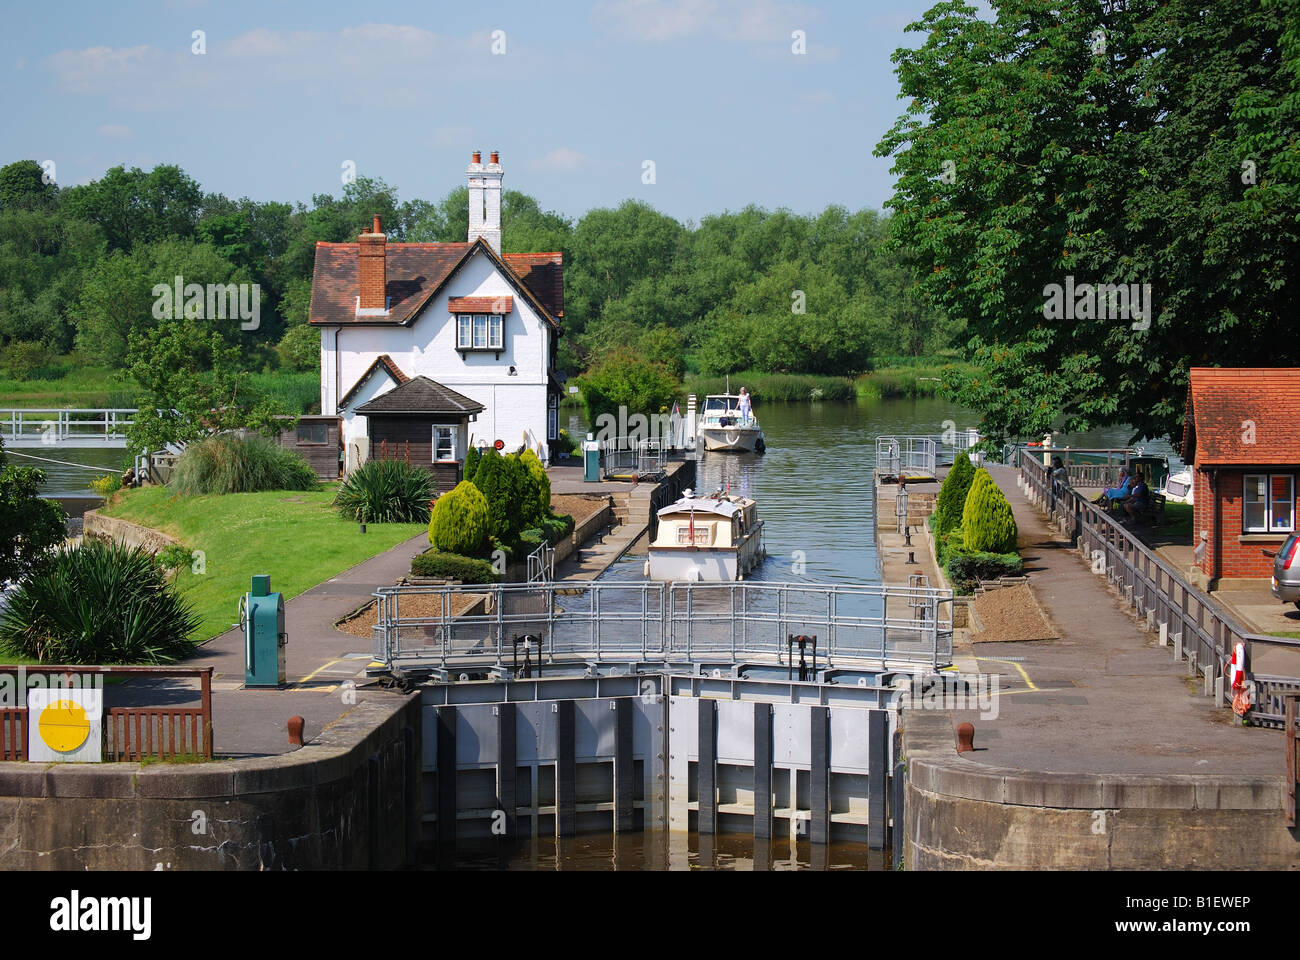 Goring Lock on tamise, Goring, Oxfordshire. Angleterre, Royaume-Uni Banque D'Images